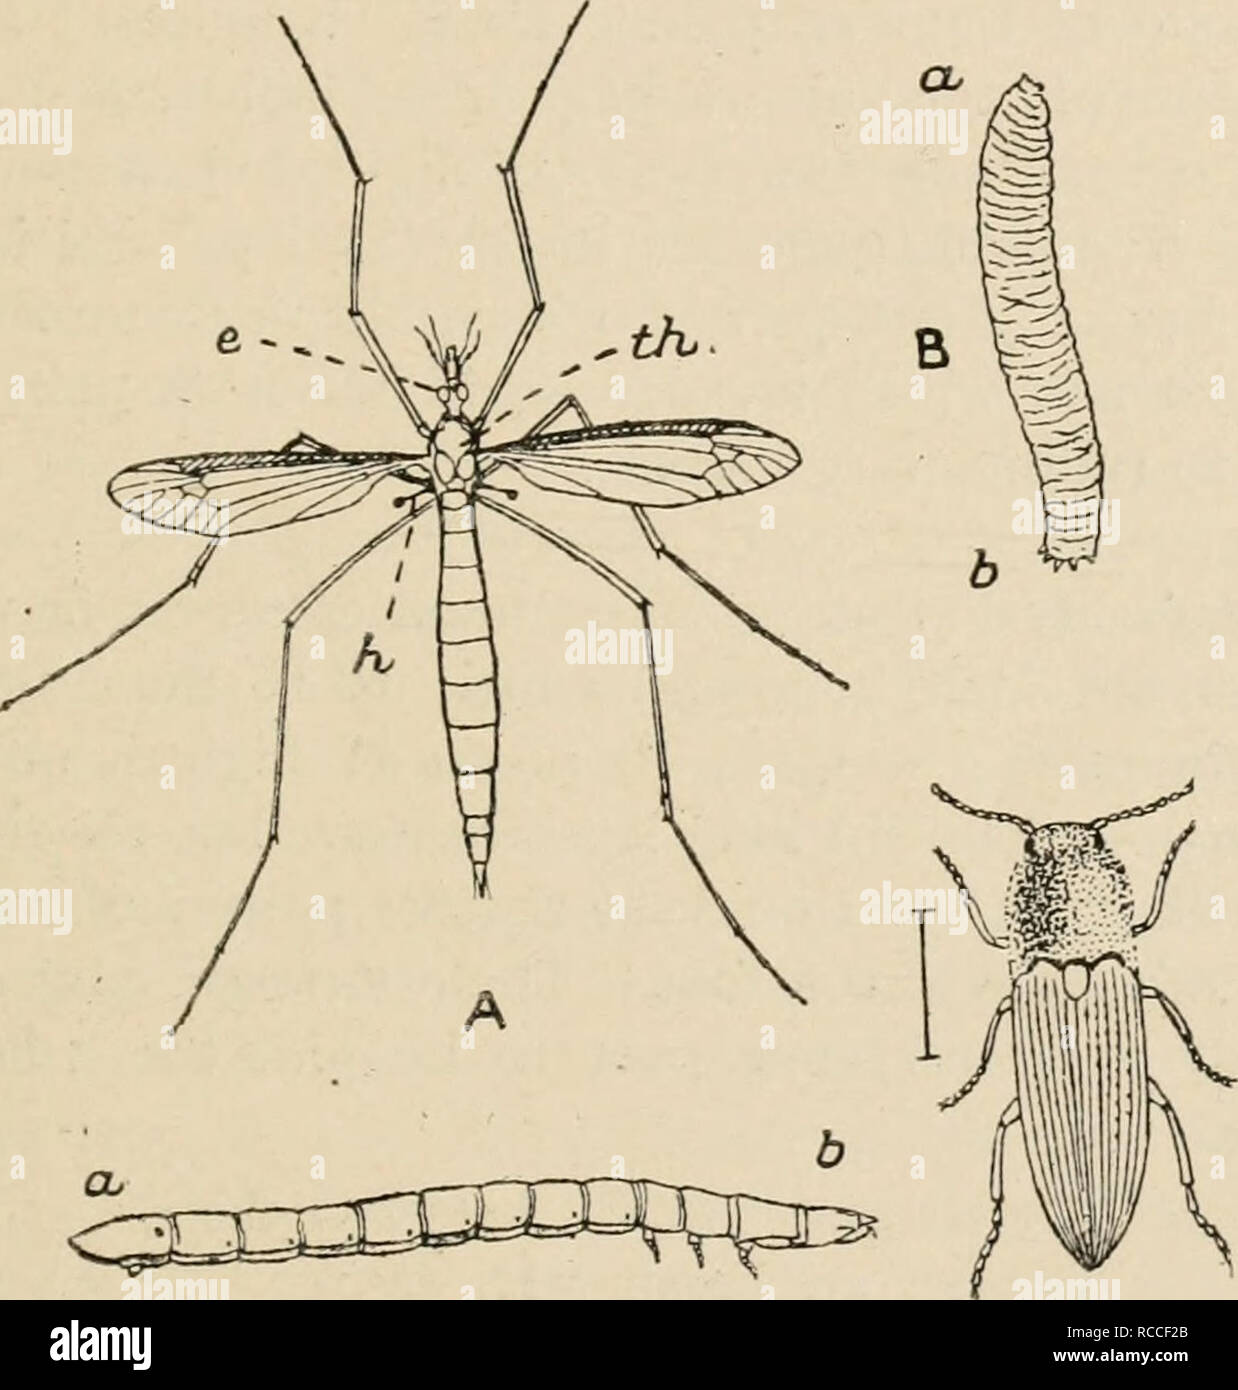 . Diversions of a naturalist. Natural history. DADDY-LONG-LEGS 217 size, are present in them in a very much dwindled condi- tion. Since most of our common flies are very small it is. D ^ Fig. 22. A, The Crane-fly (Daddy-Long-Legs), Tipula oleracea. e, the left eye ; /i, one of the balancers or &quot; halleres,&quot; which are the modified second pair of wings ; ^/i, the thorax. Natural size. B, The &quot;Leather-jacket,&quot; the grub of the crane-fly. a, head ; d, tail. Natural size. C, The Click-beetle or Skip-jack, Elater obscurus. The line beside it shows its natural size. D, The true Wire Stock Photo